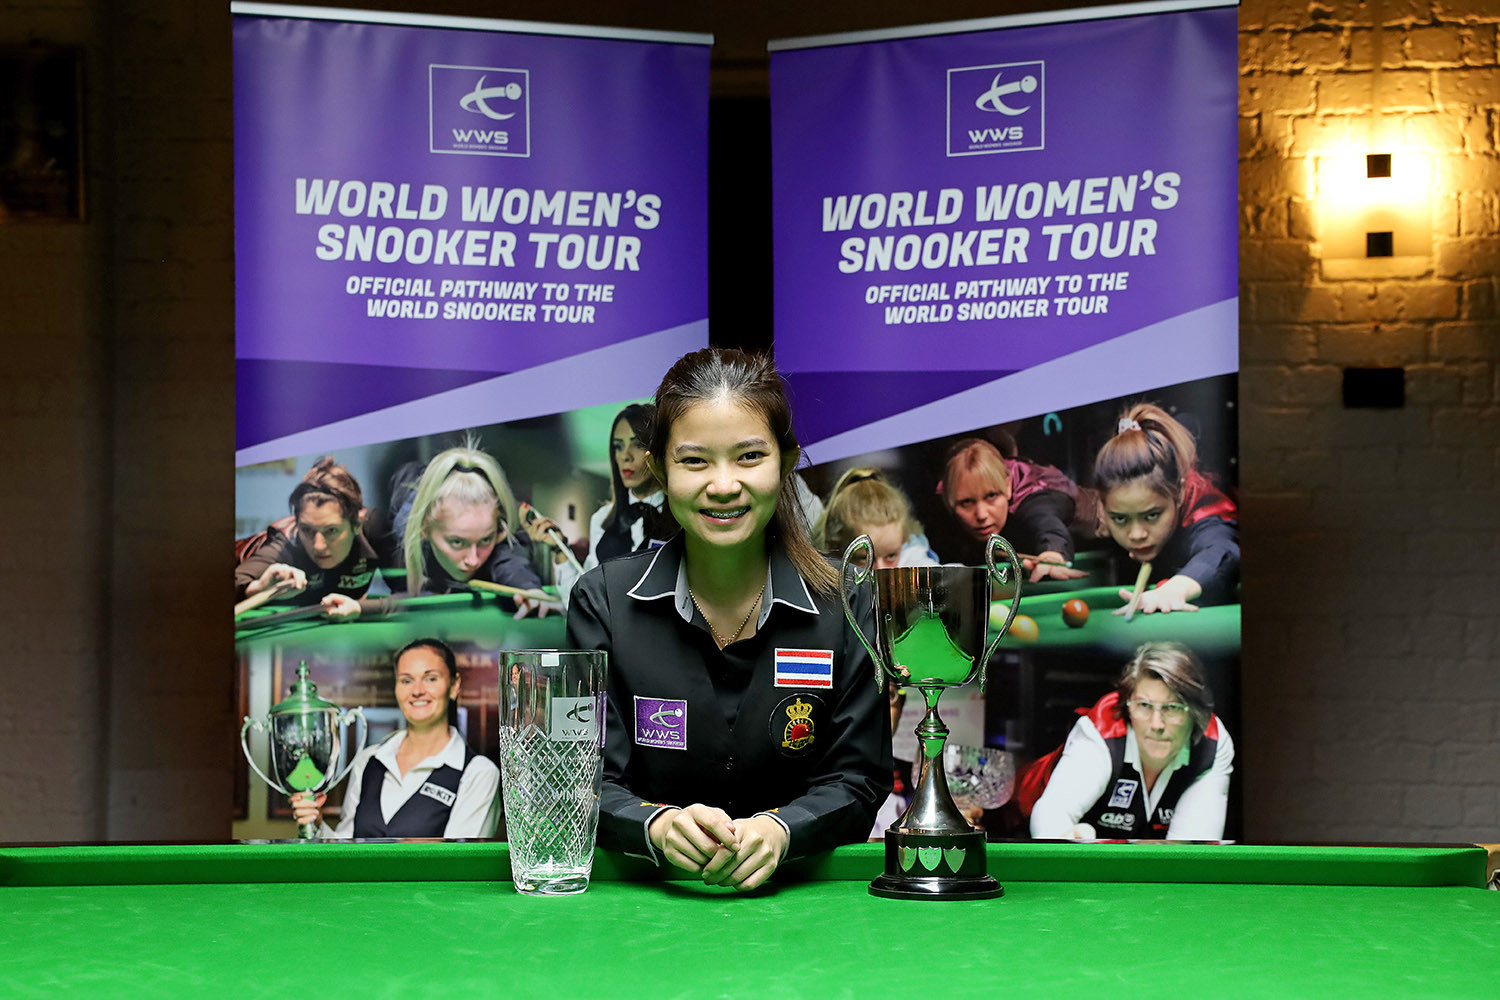 Nutcharut Wongharuthai of Thailand won the World Women's Snooker Championship final in dramatic fashion, defeating Wendy Jans 6-5 on the final black ©World Women's Snooker